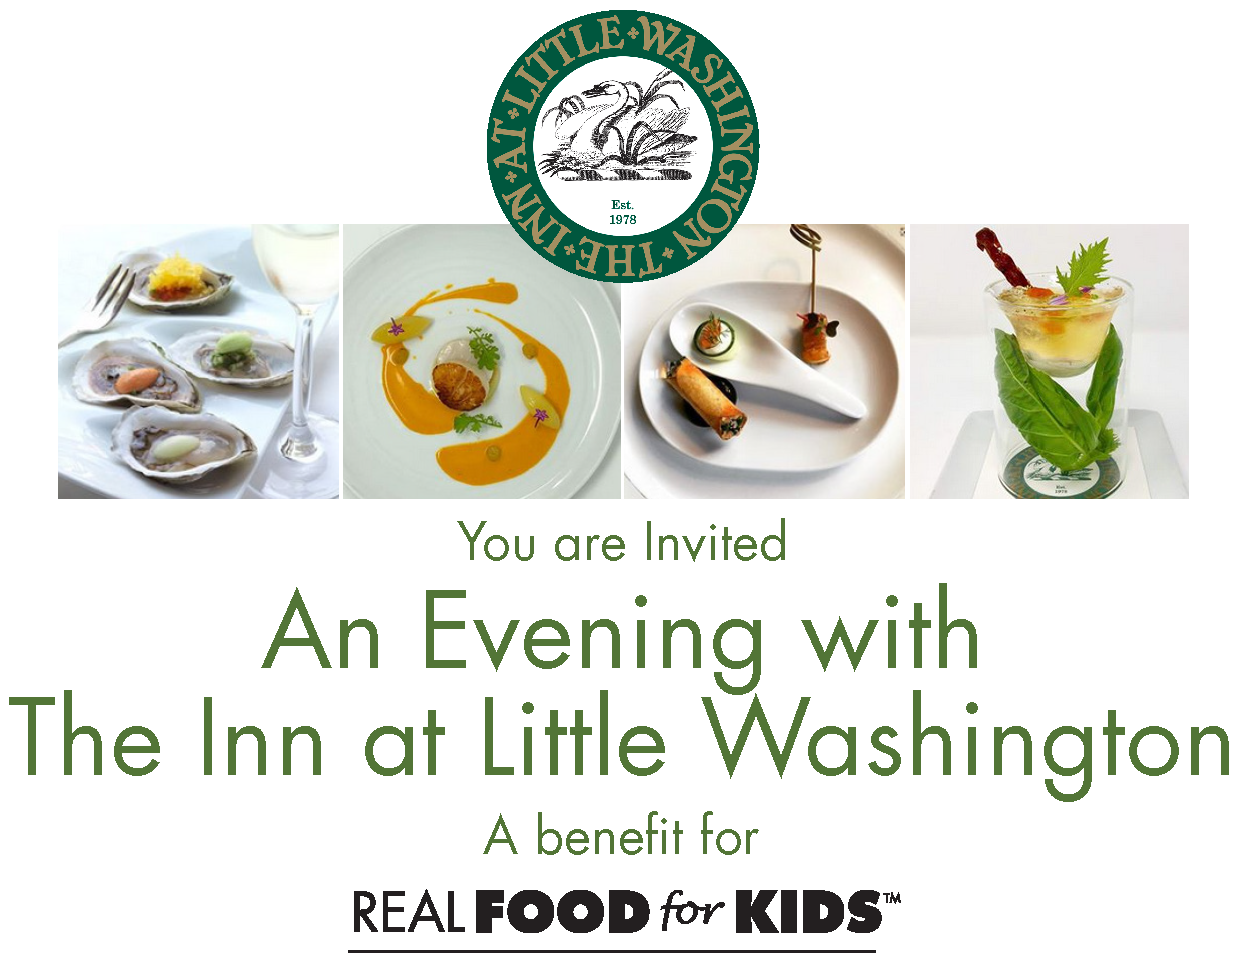 You are Invited to An Evening with The Inn at Little Washington, A benefit for Real Food for Kids